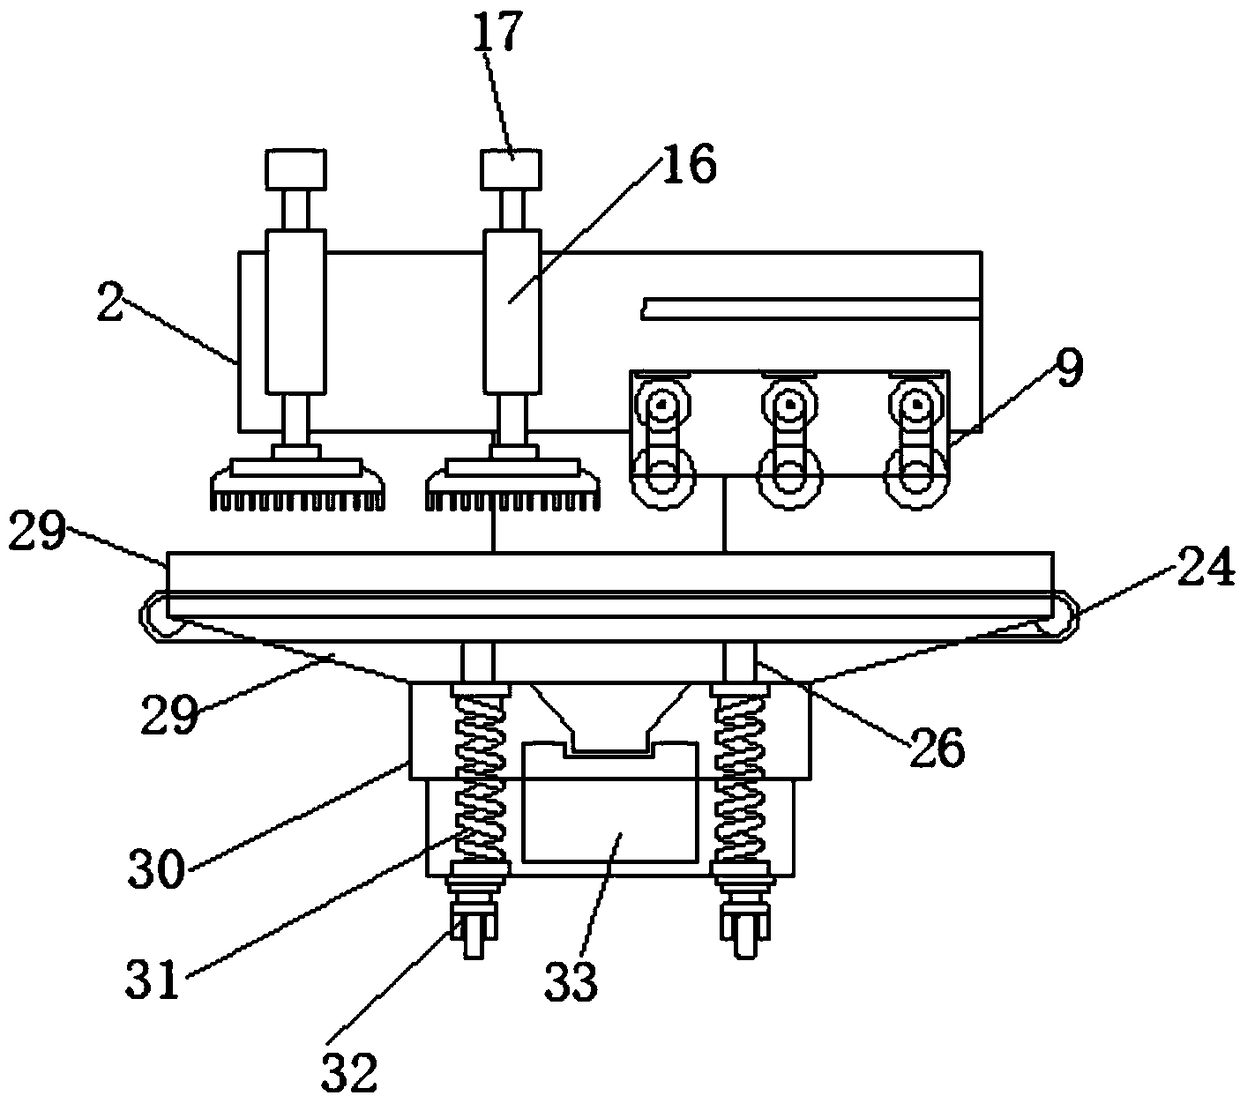 Metal grinding device used for processing metal and capable of automatically driving and conveniently adjusting size